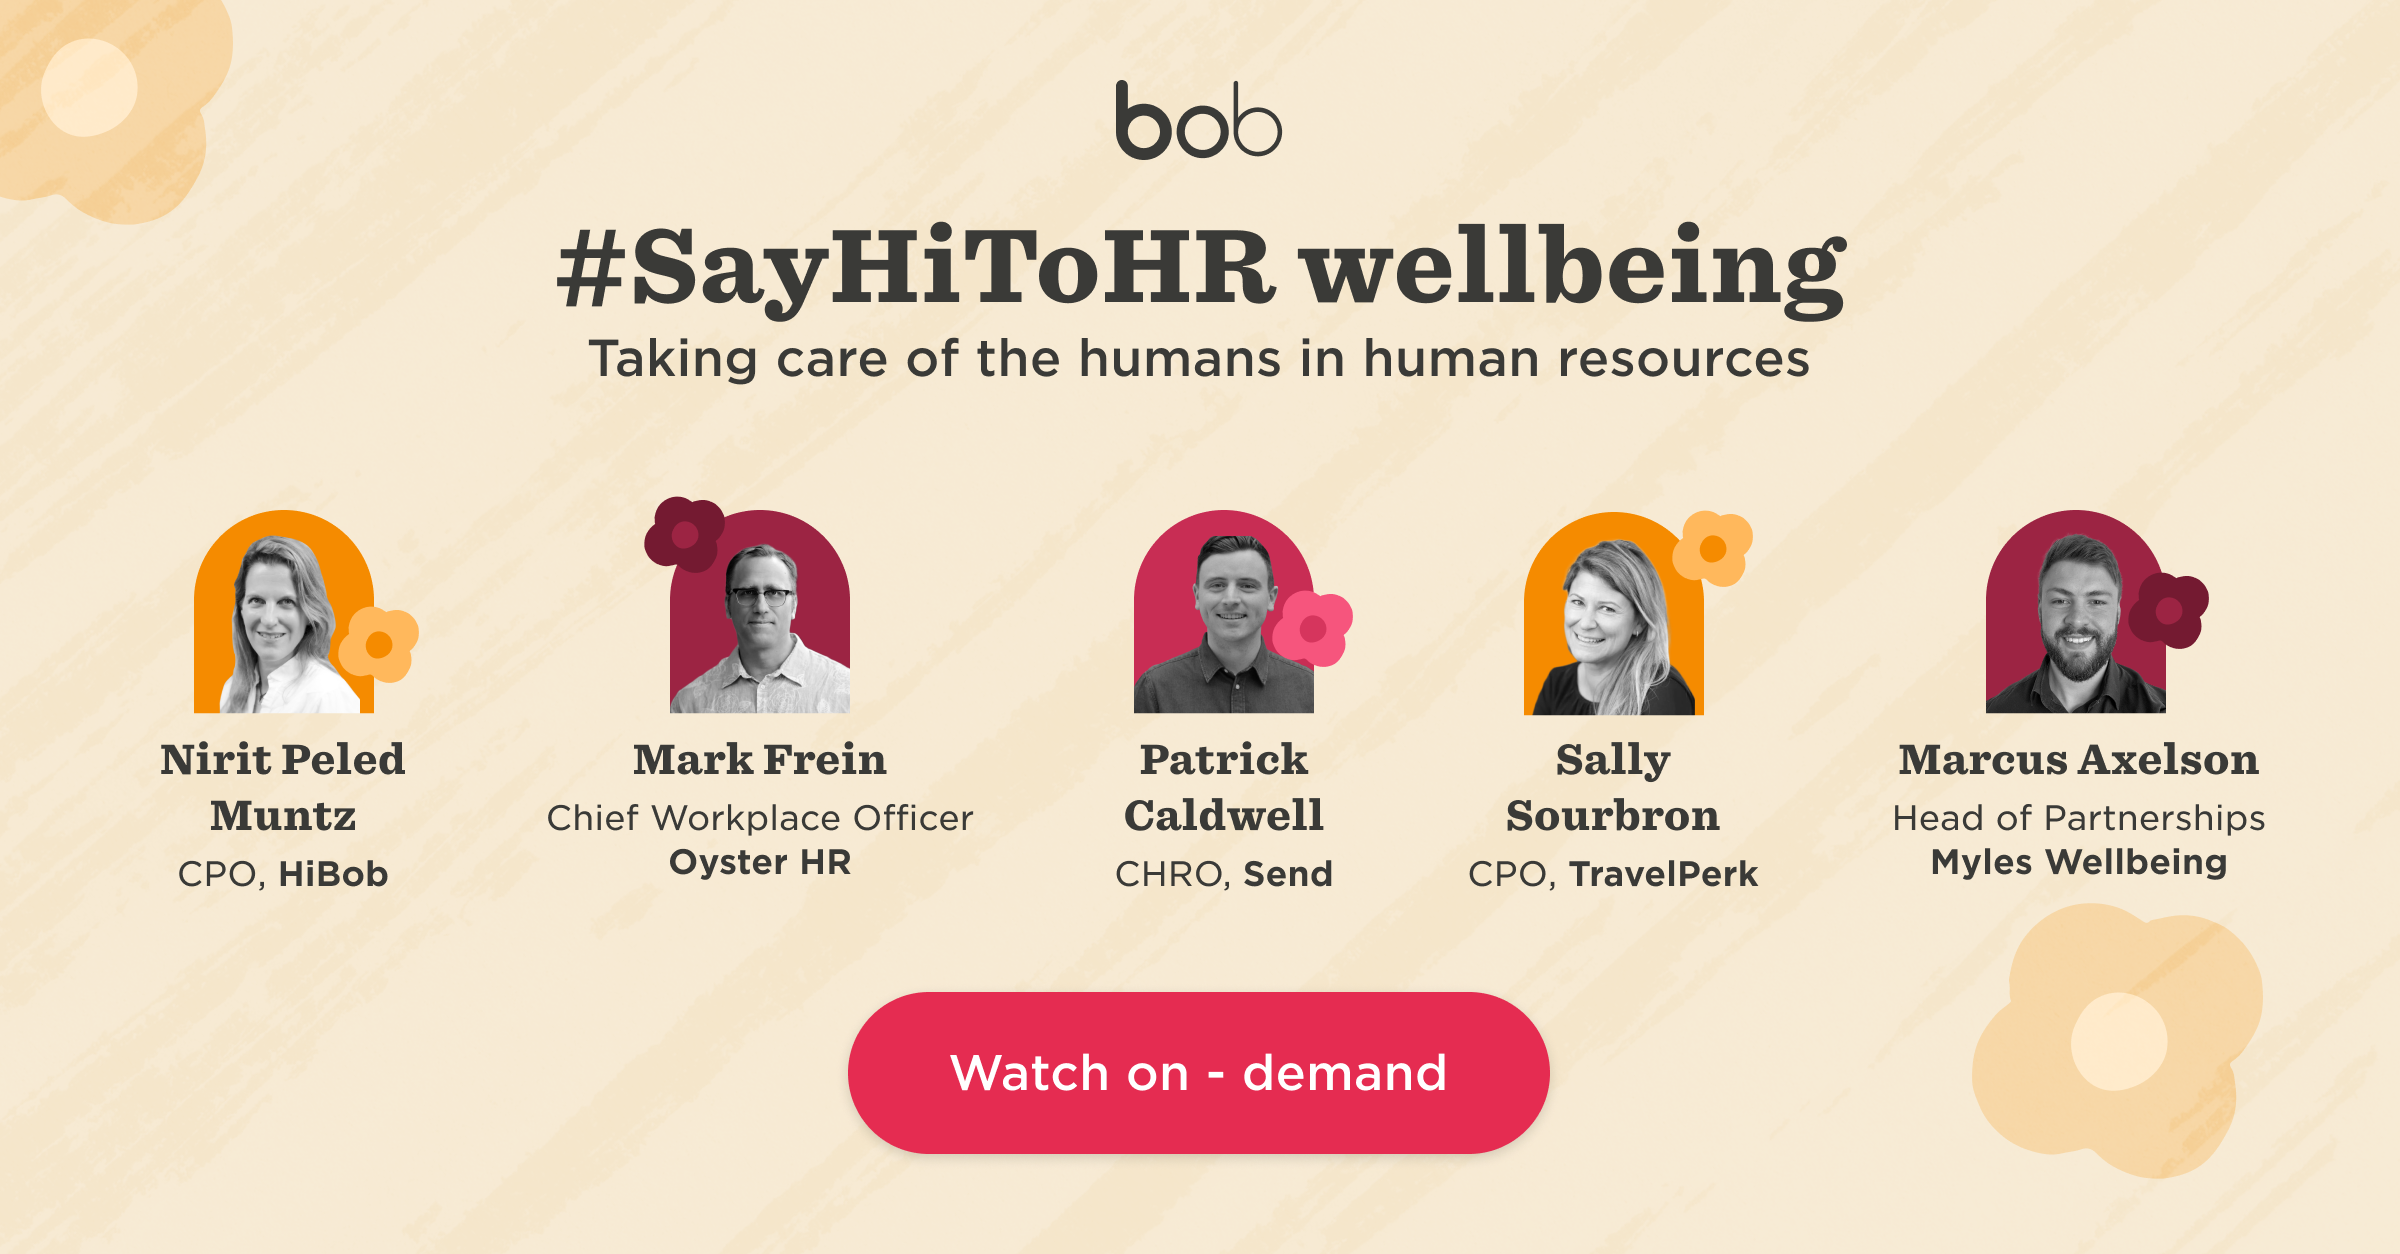 #SayHiToHR wellbeing: Taking care of the humans in human resources - POST_EVENT_HR-Wellbeing-Global-Campaign_Webinar_EMEA_sharing_image-1.png